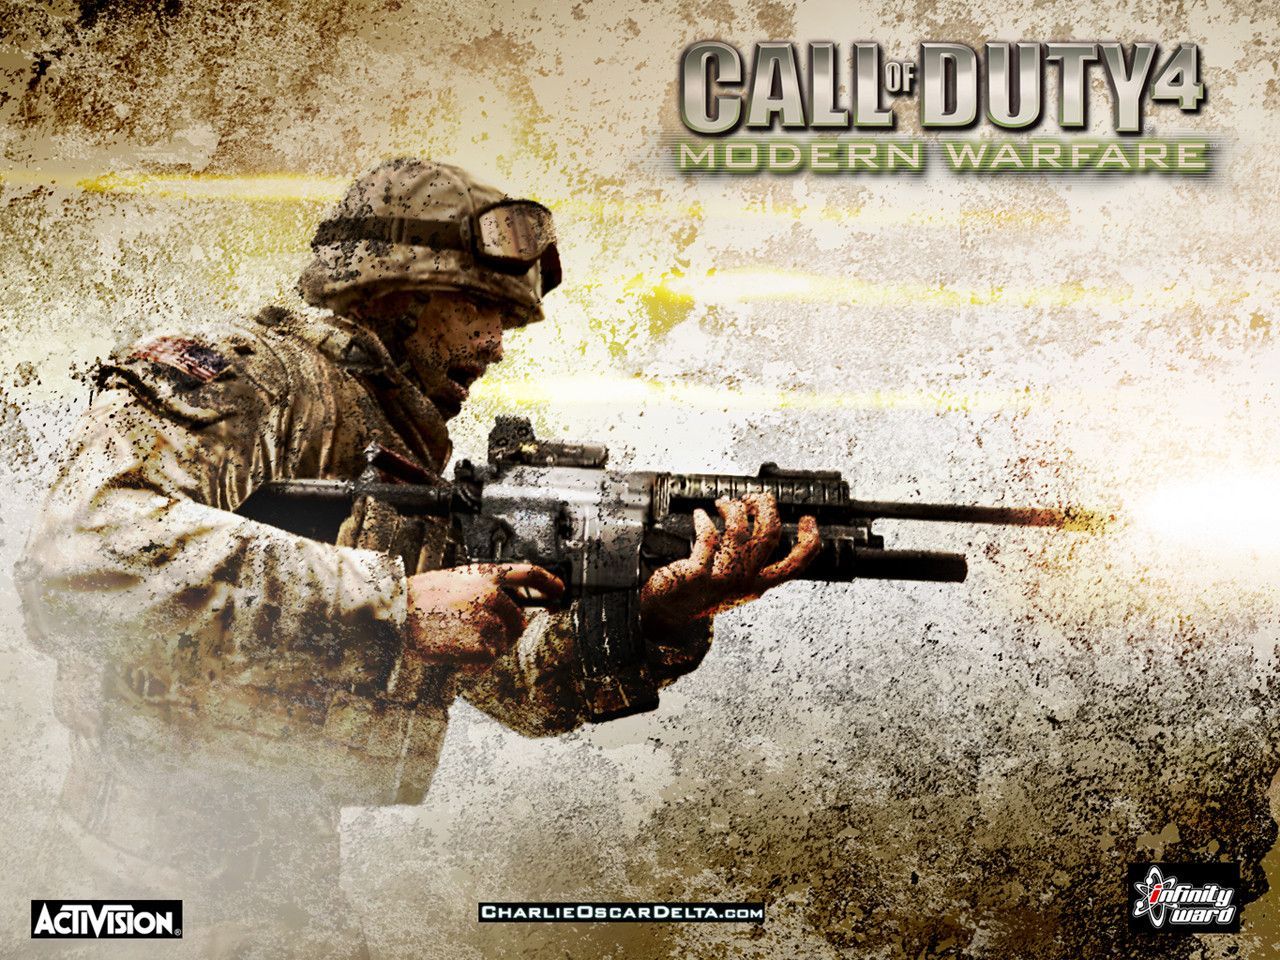 CoD4 Central CoD4 Wallpapers Call of Duty 4 Remaster